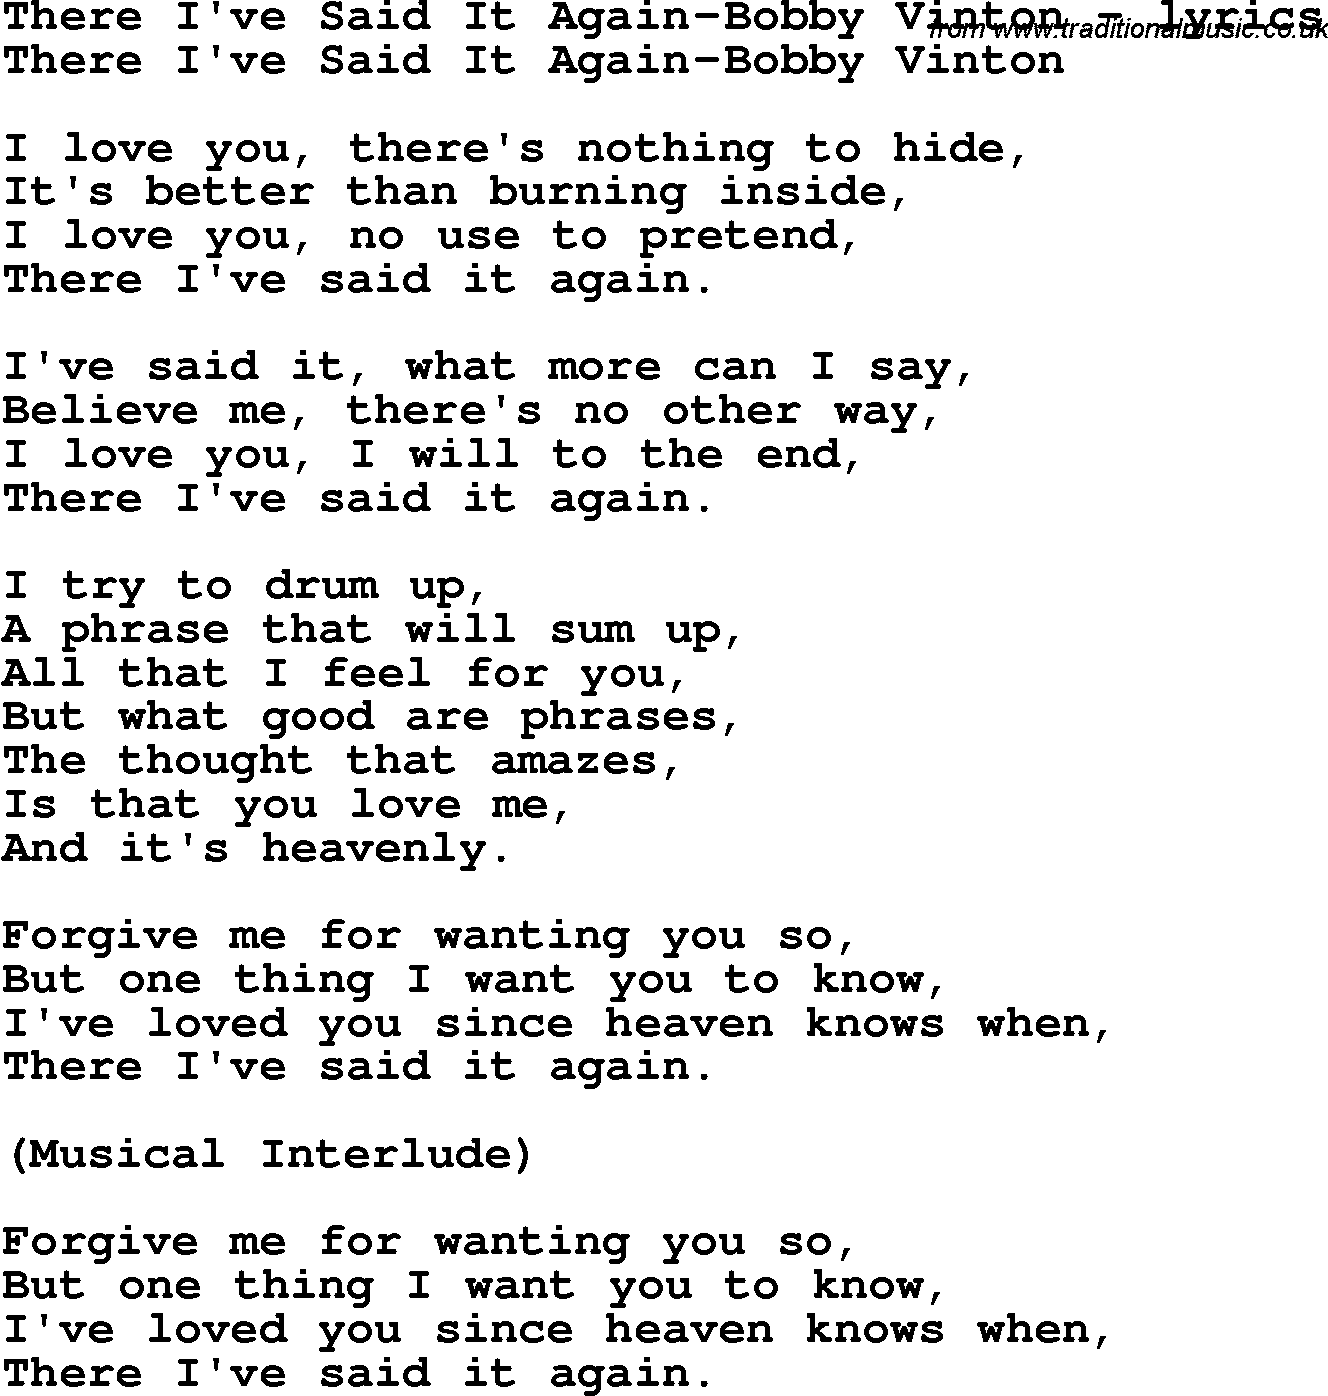 Love Song Lyrics for: There I've Said It Again-Bobby Vinton